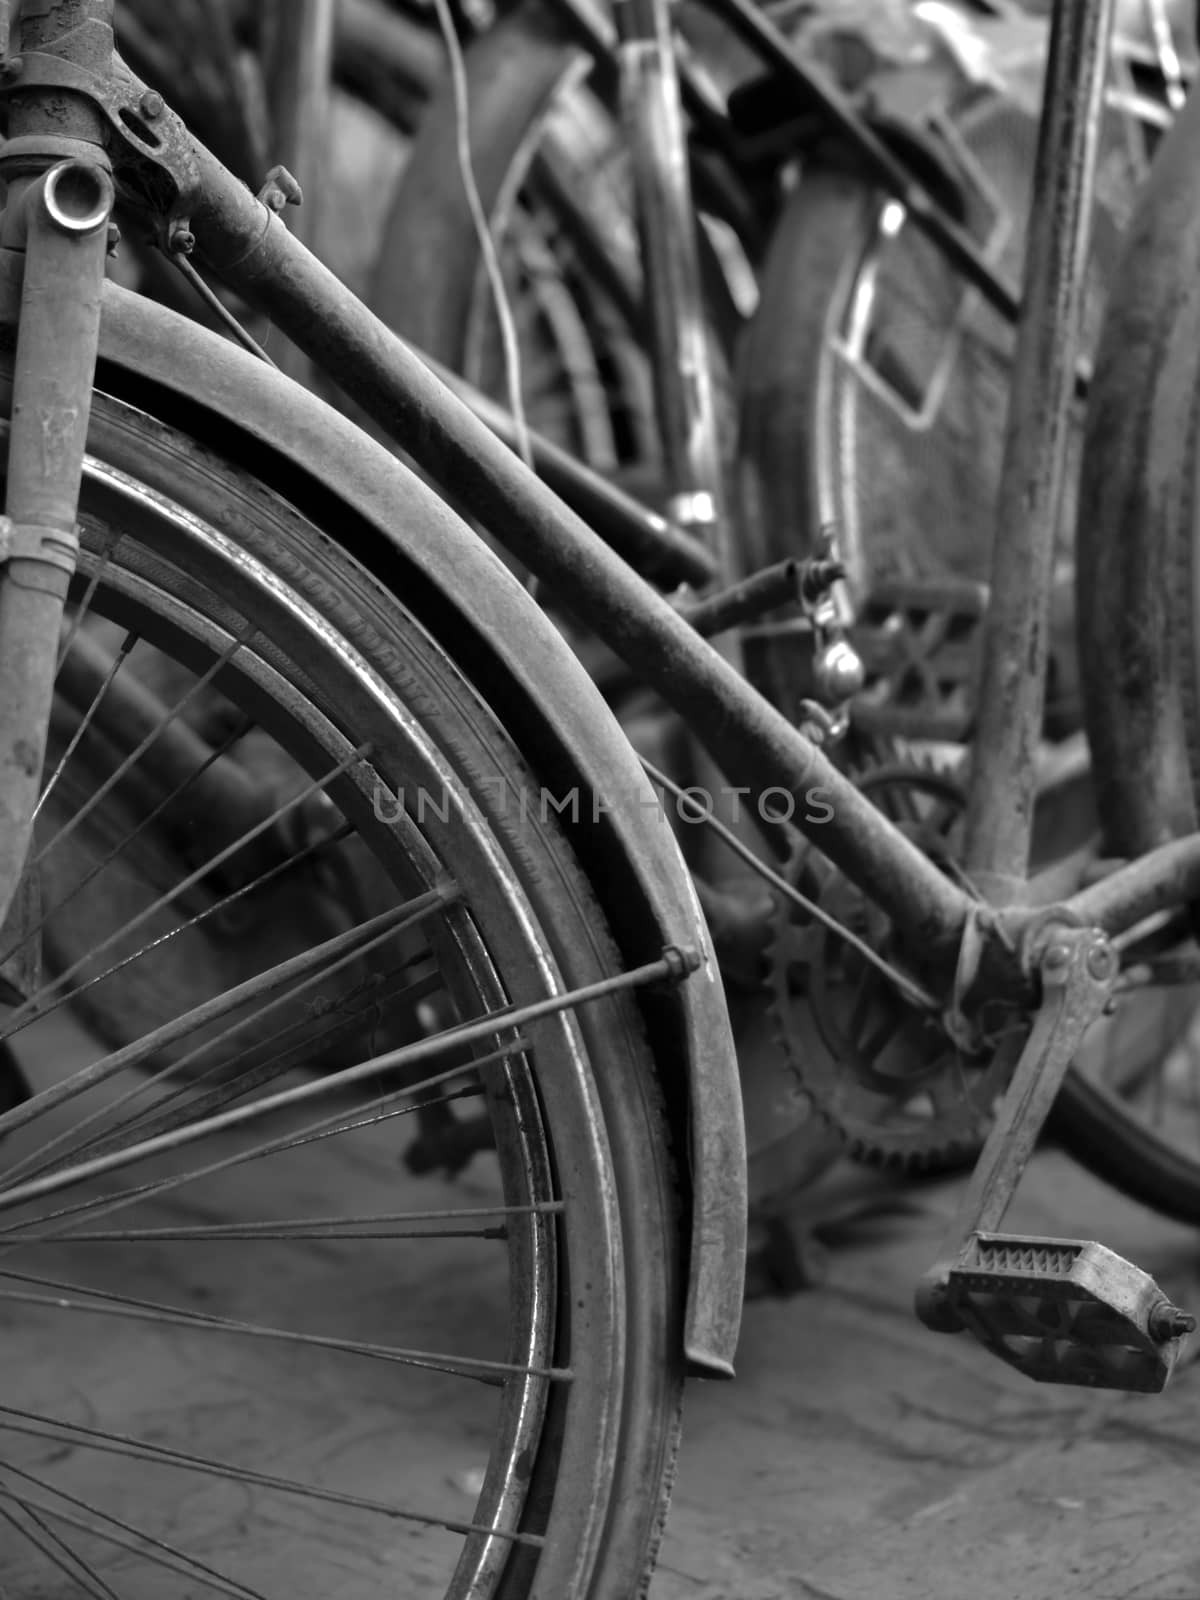 ABSTRACT SHOT OF OLD RUSTY BICYCLE PARTS by PrettyTG